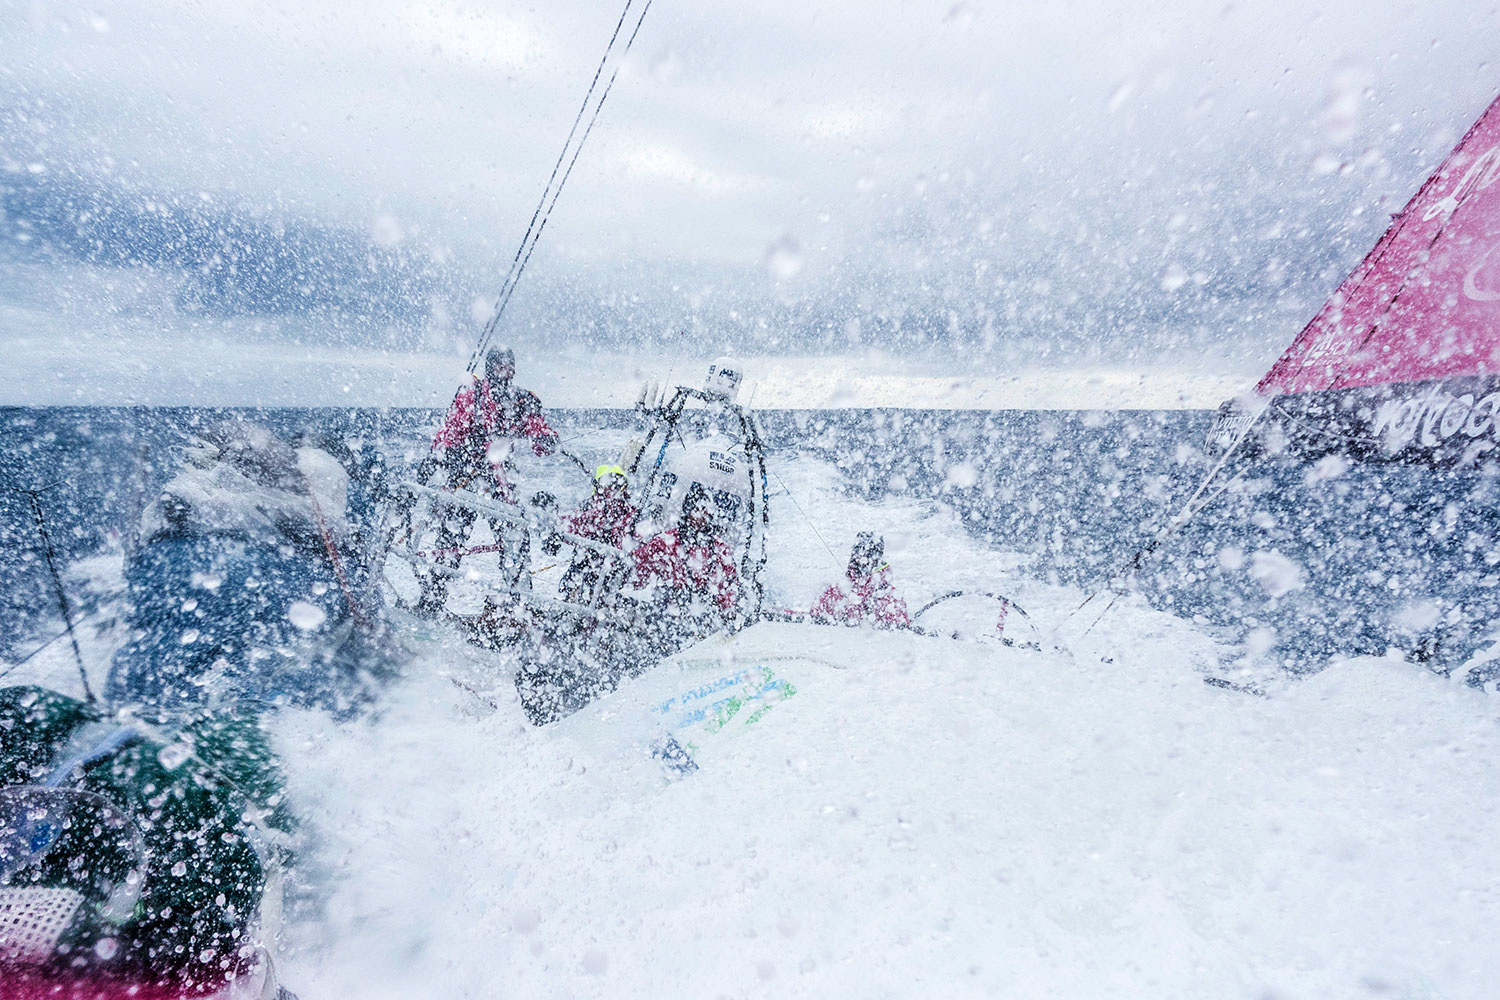 March, 2015. Leg 5 onboard Team SCA, from New Zealand to Brazil through the Southern Ocean. We're leaving behind the remnants of Cyclone Pam and heading into the most remote part of the world. Wind and swell have picked up and it's getting very cold and wet on deck. PHOTO: ANNA-LENA ELLED / TEAM SCA / VOLVO OCEAN RACE